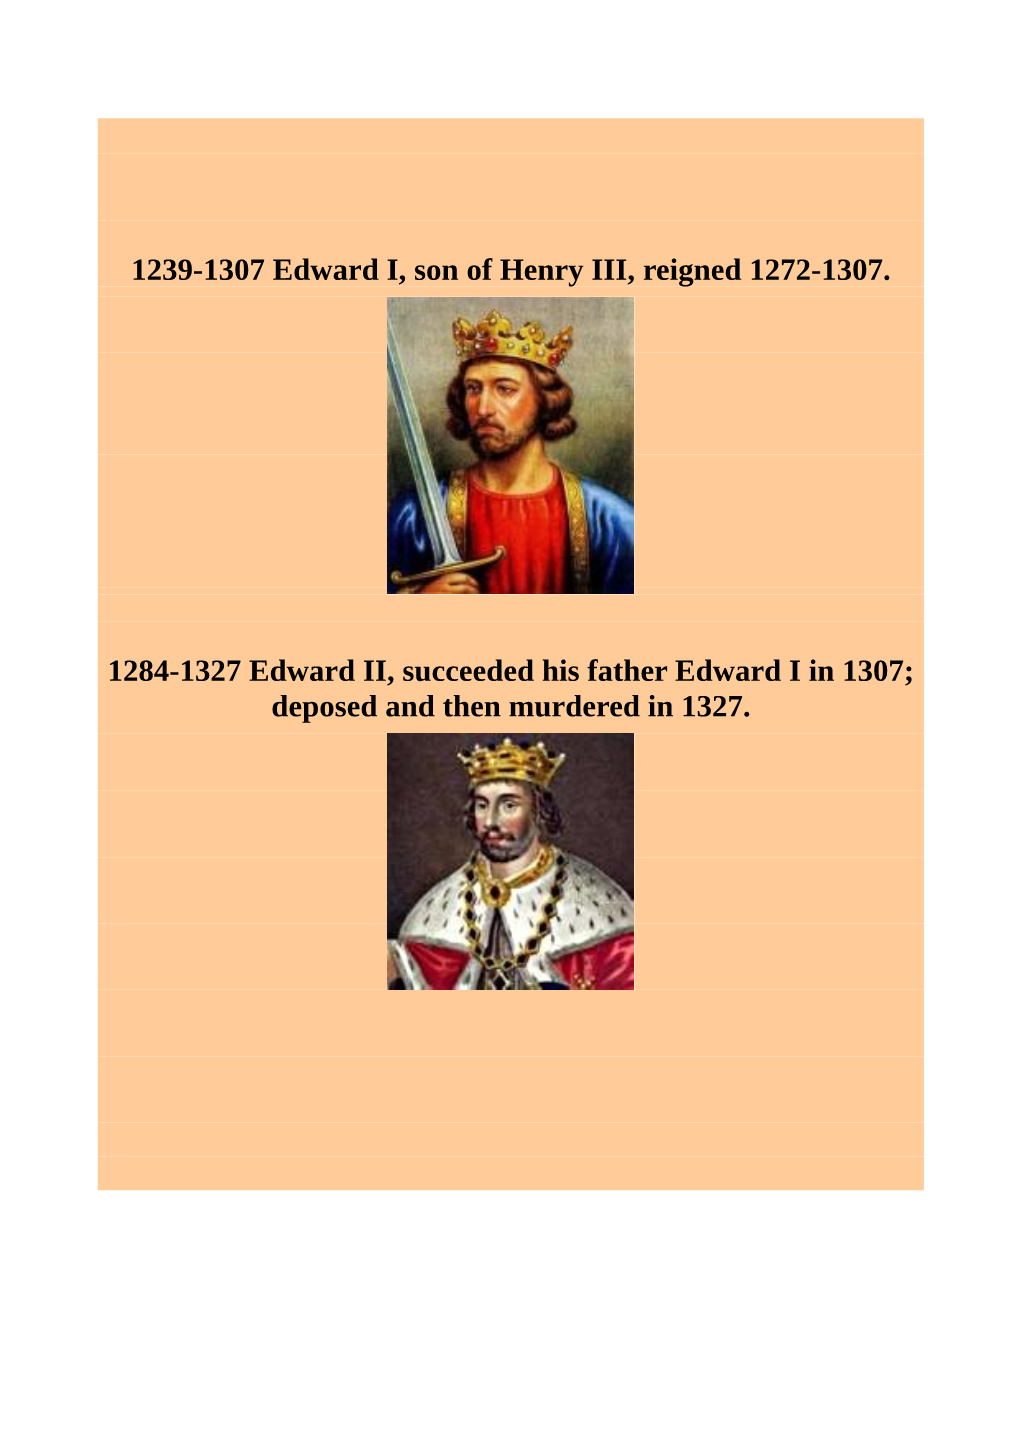 Apperley Family Tree Rolled Back to King Edward I